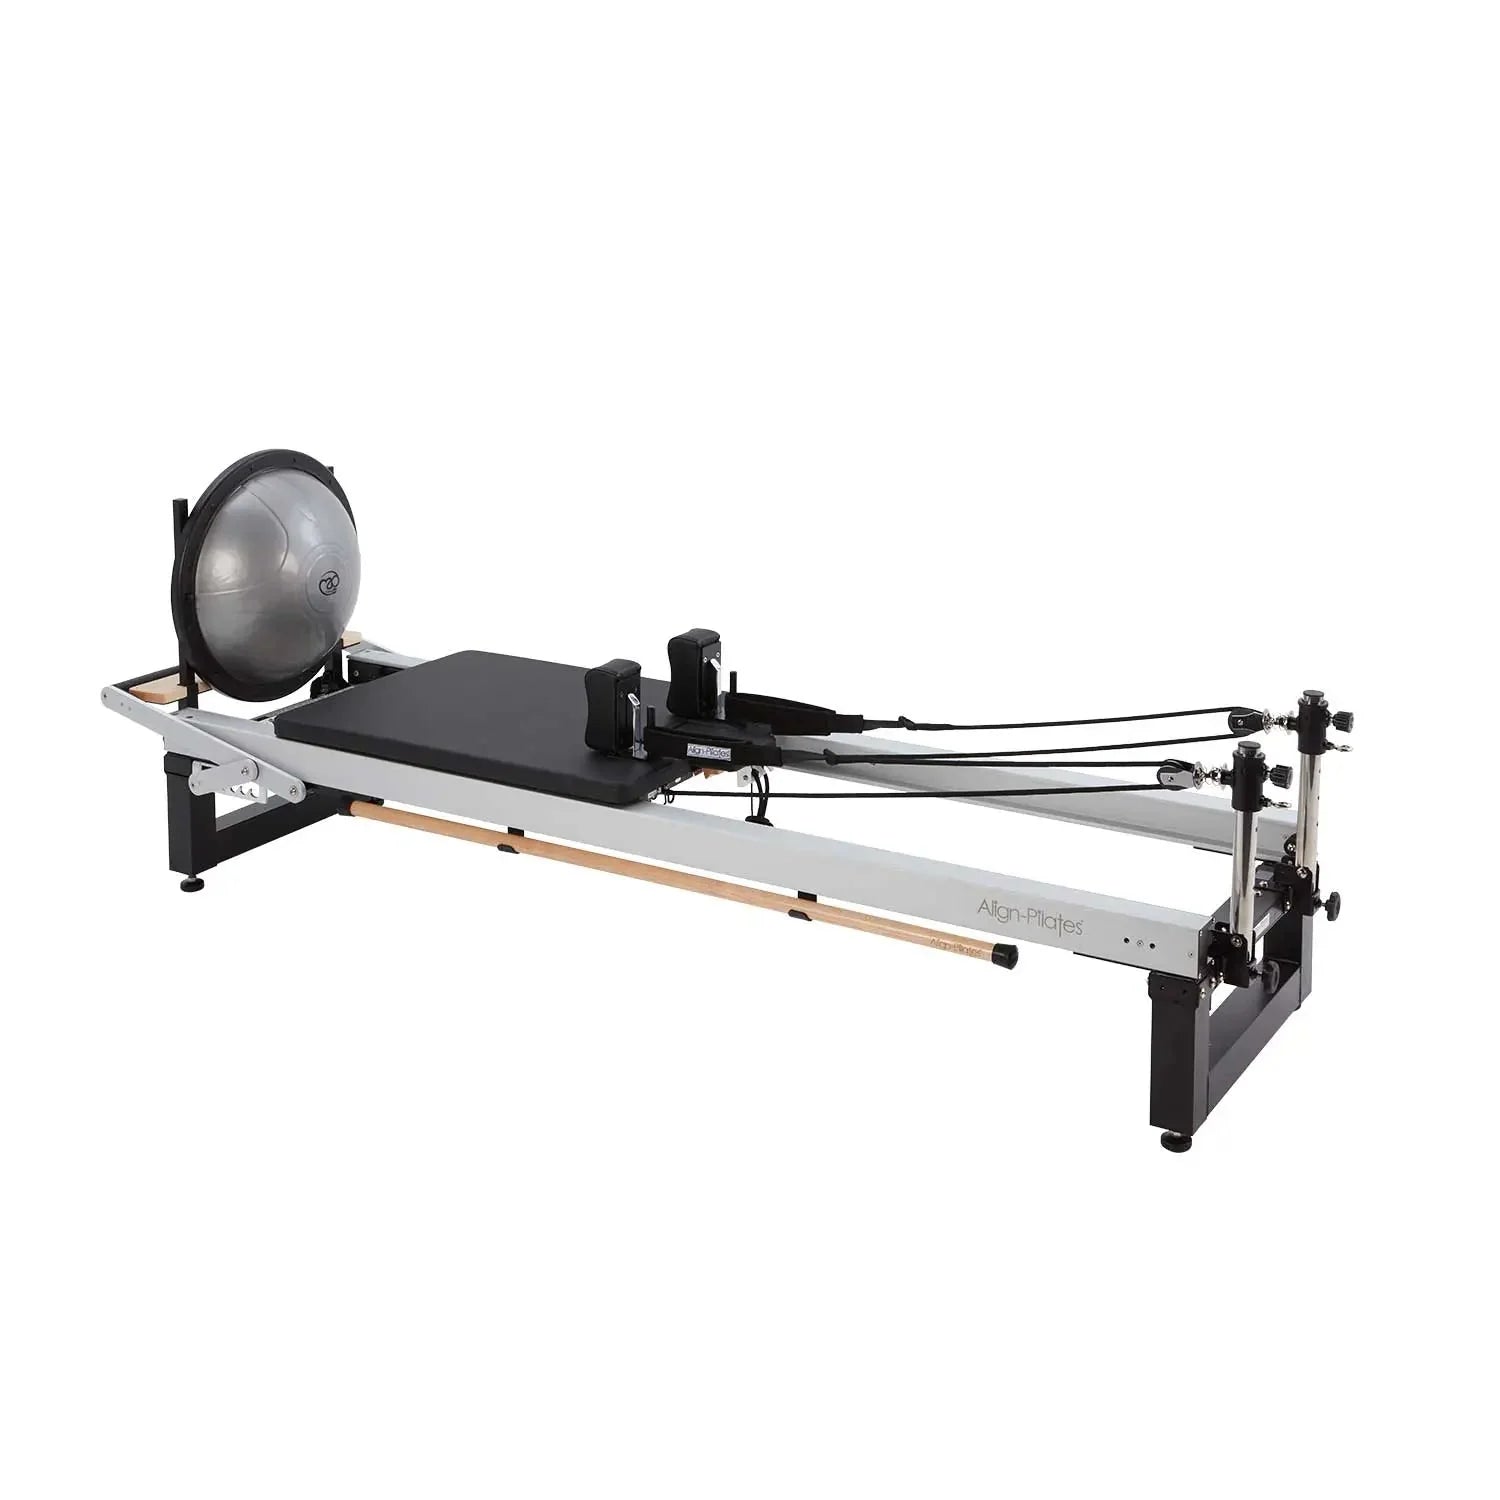 Image of Align Pilates A8 Pro Reformer, a professional-grade Pilates machine with sleek design with bosu ball